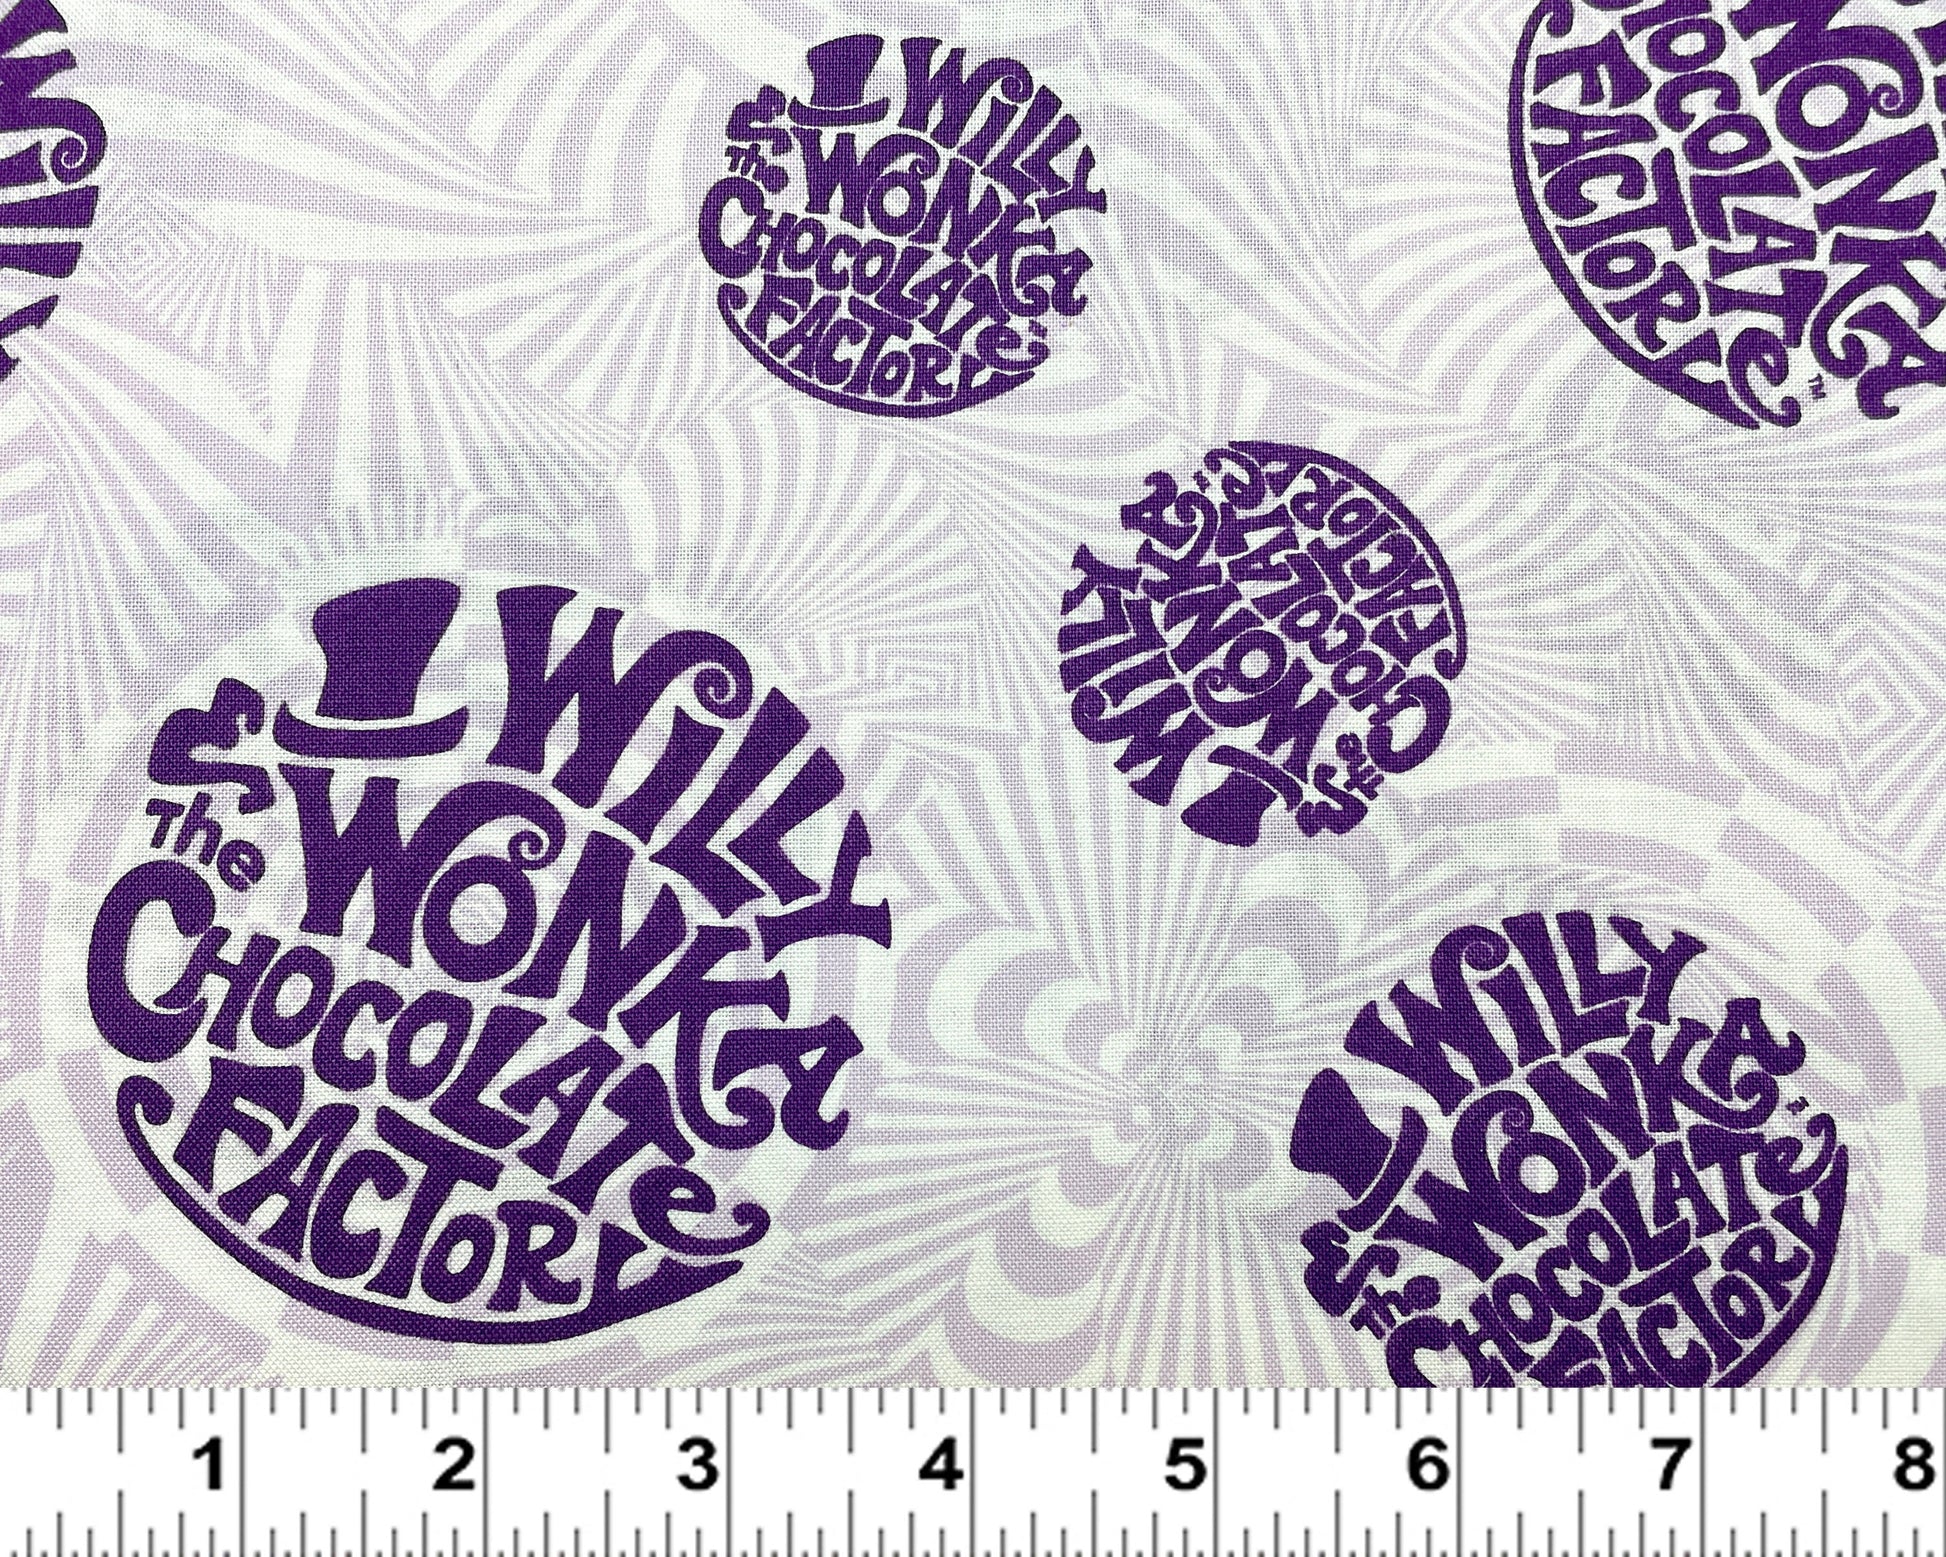 Willy Wonka Fabric - Lilac - 100% cotton fabric by Camelot Fabrics - Movie fabric, Willy Wonka and Chocolate Factory - SHIPS NEXT DAY